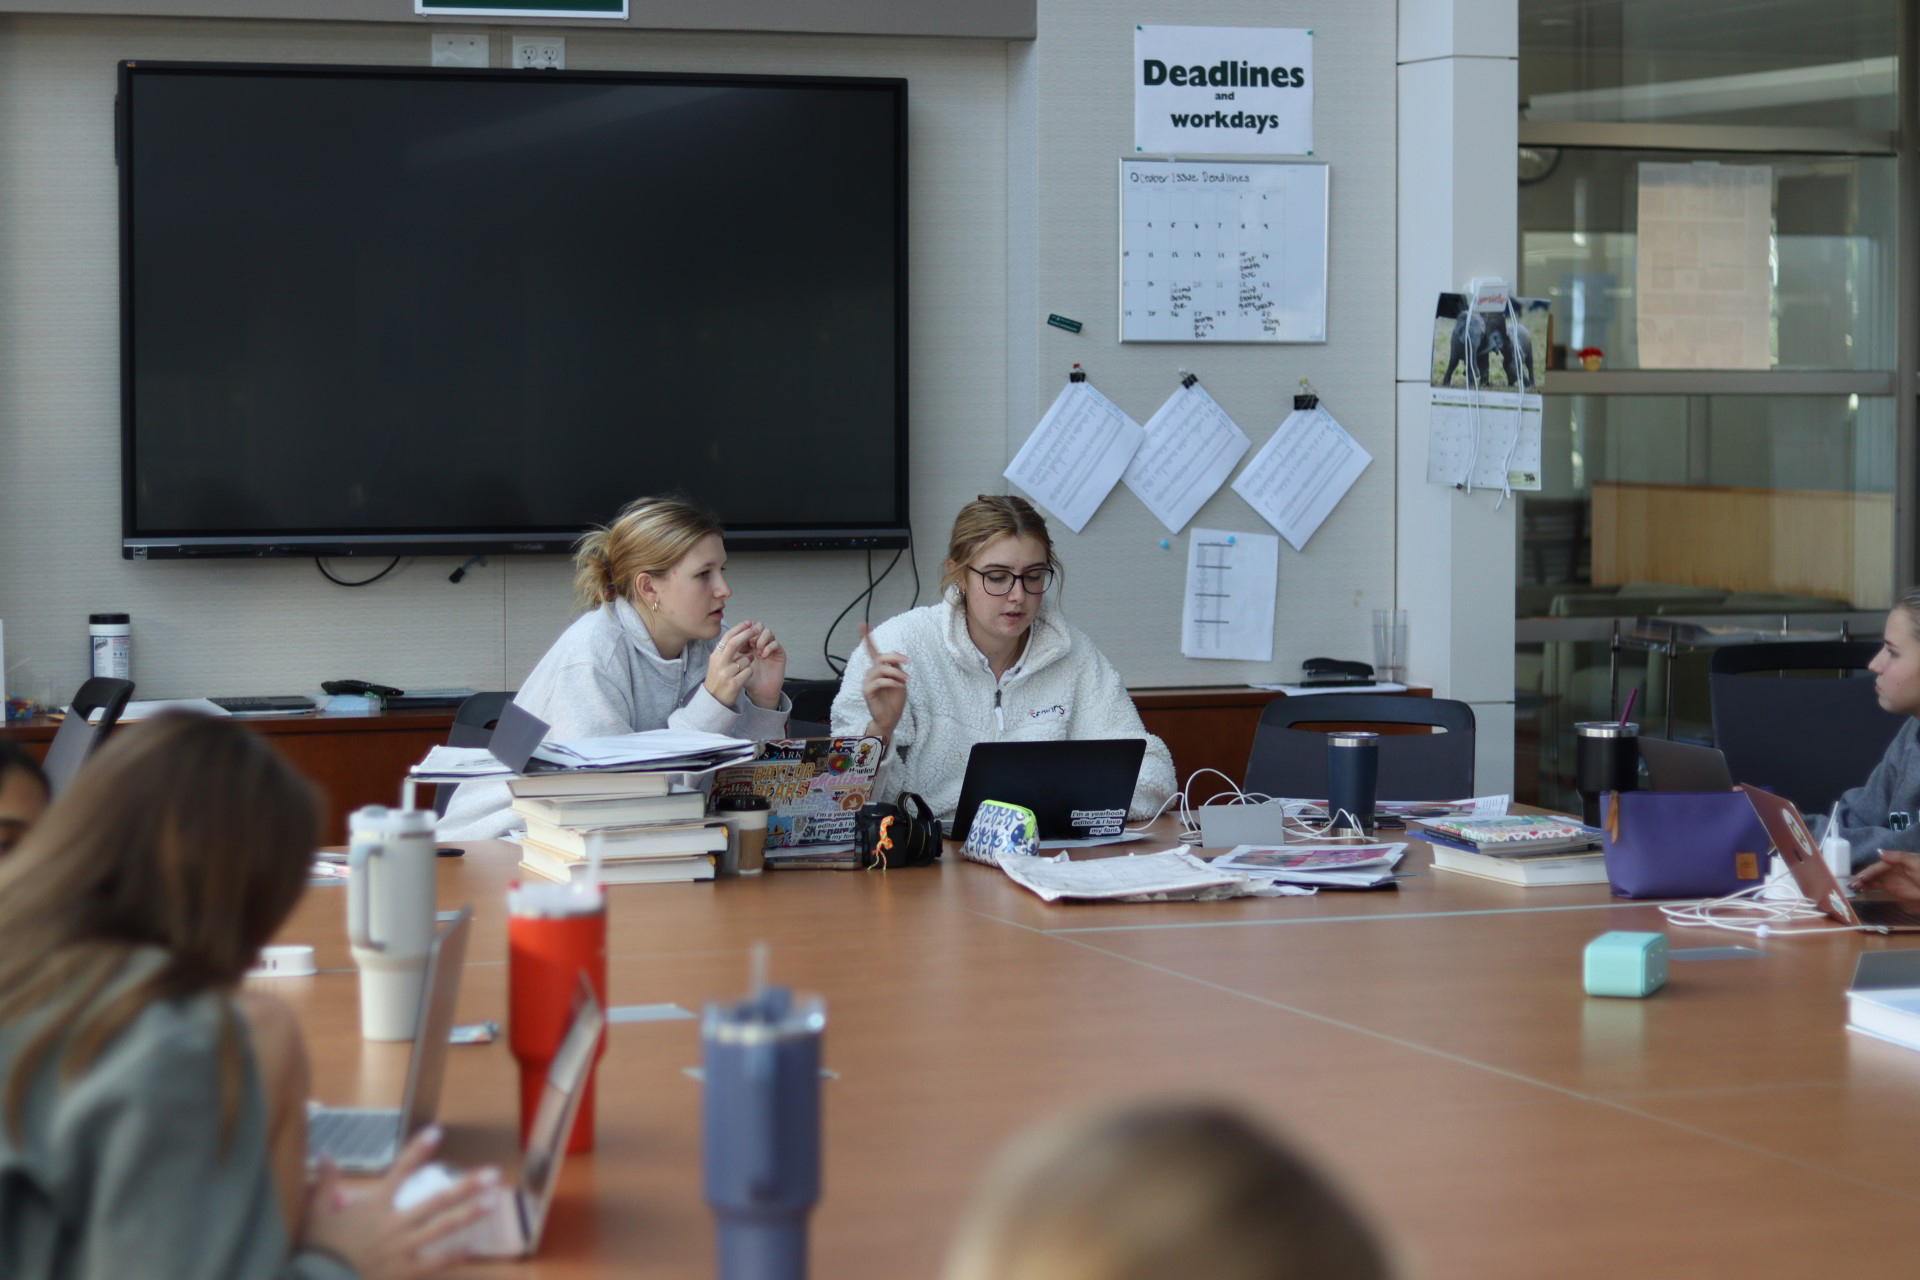 The Cornerstones Editors-in-Chief brief their classmates on plans for an upcoming spread.